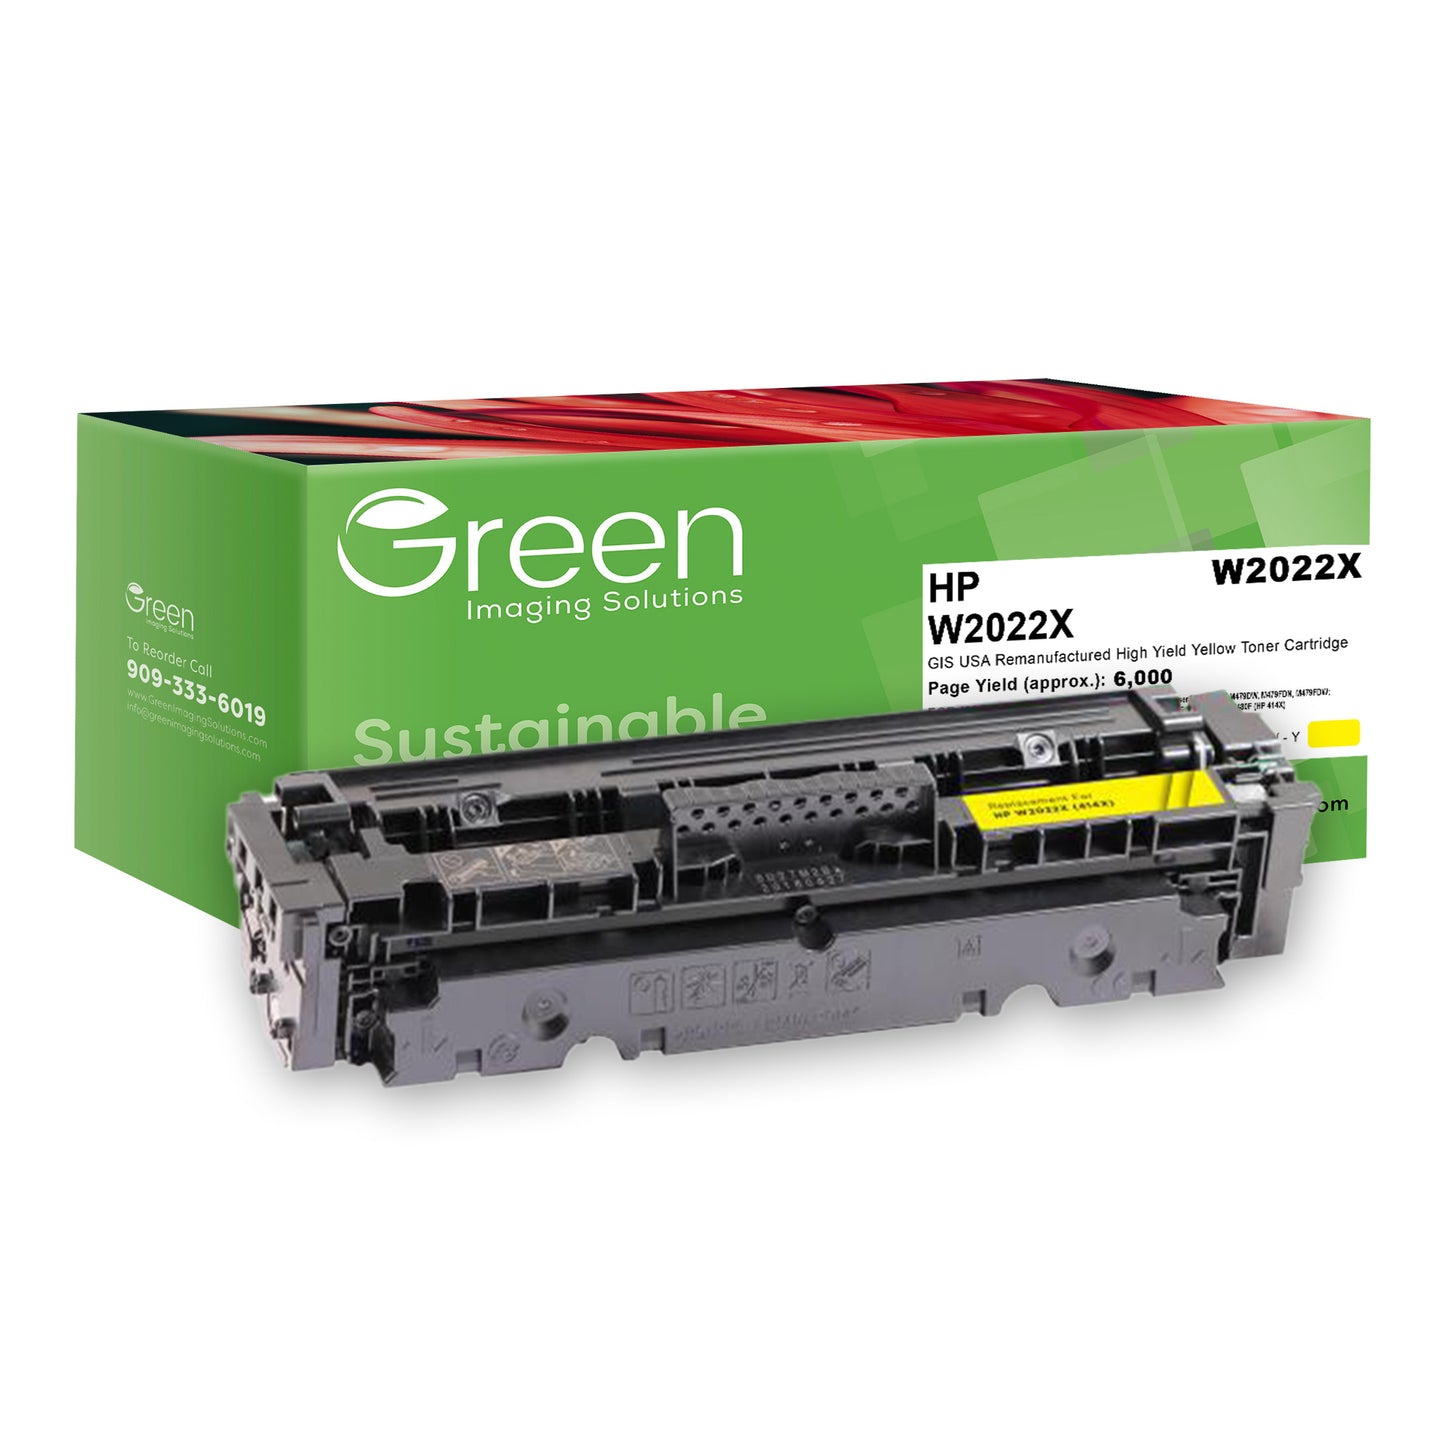 Green Imaging Solutions USA Remanufactured High Yield Yellow Toner Cartridge (New Chip) for HP 414X (W2022X)